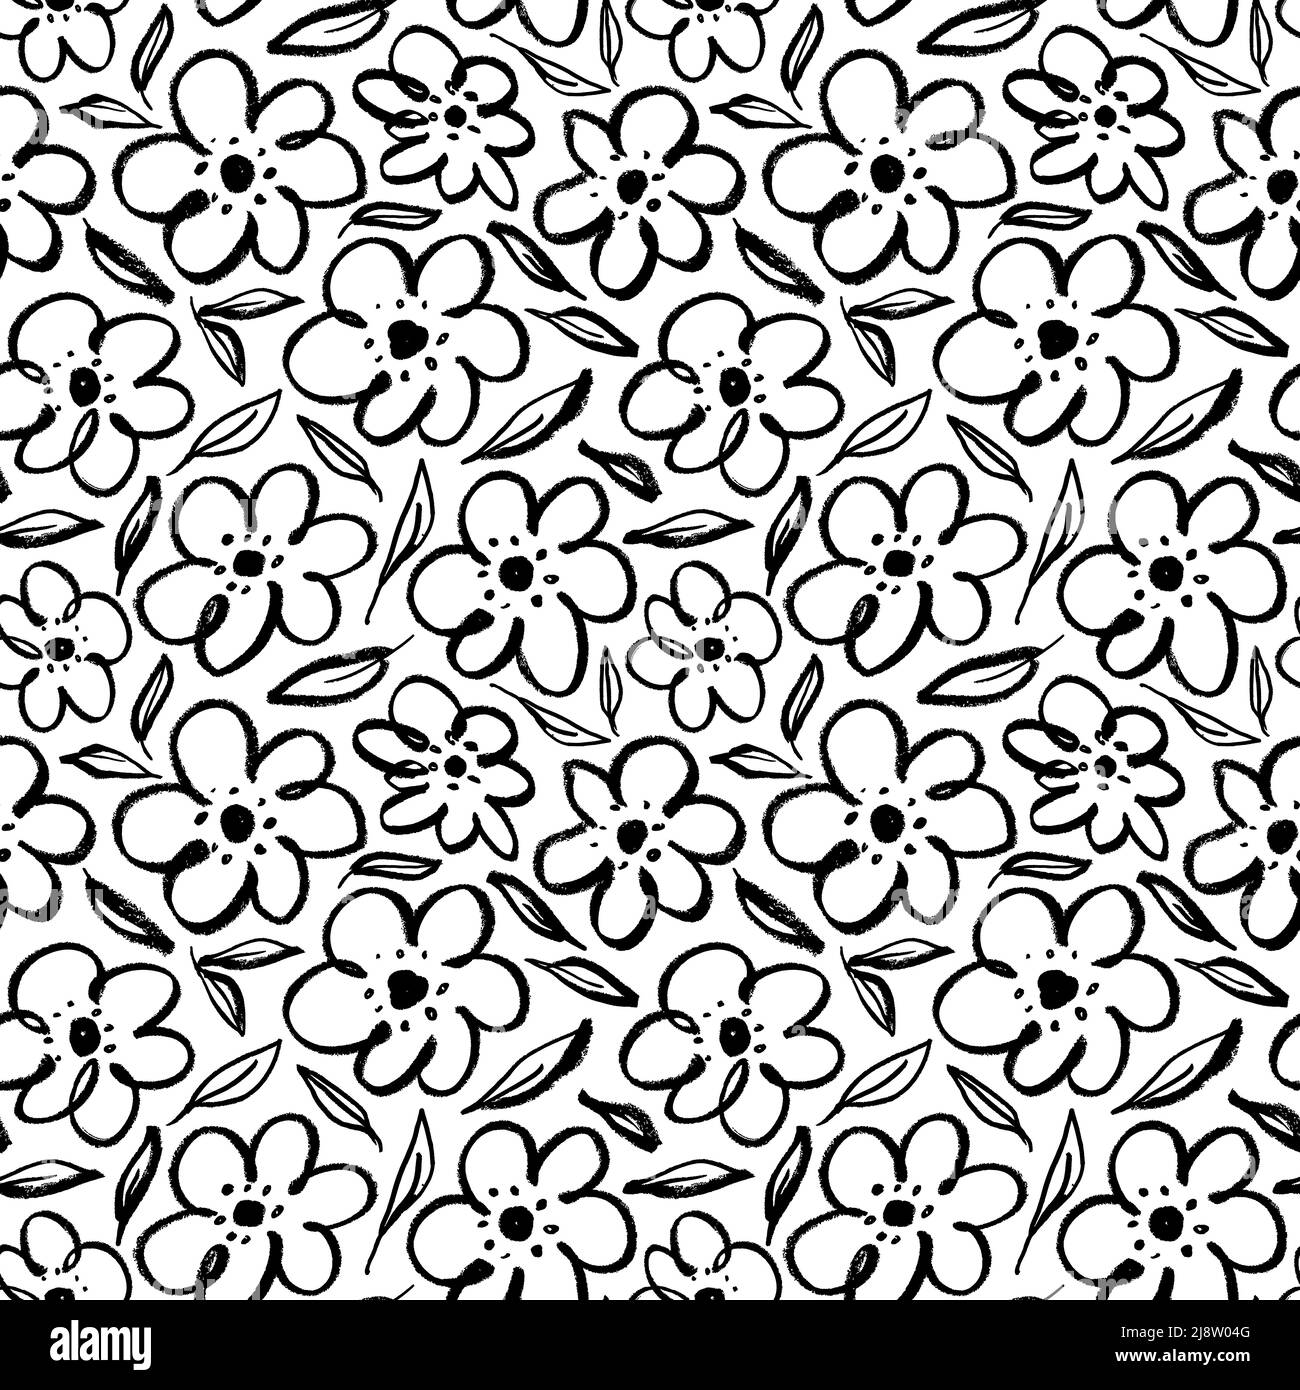 Childish style simple black flowers with leaves. Stock Vector